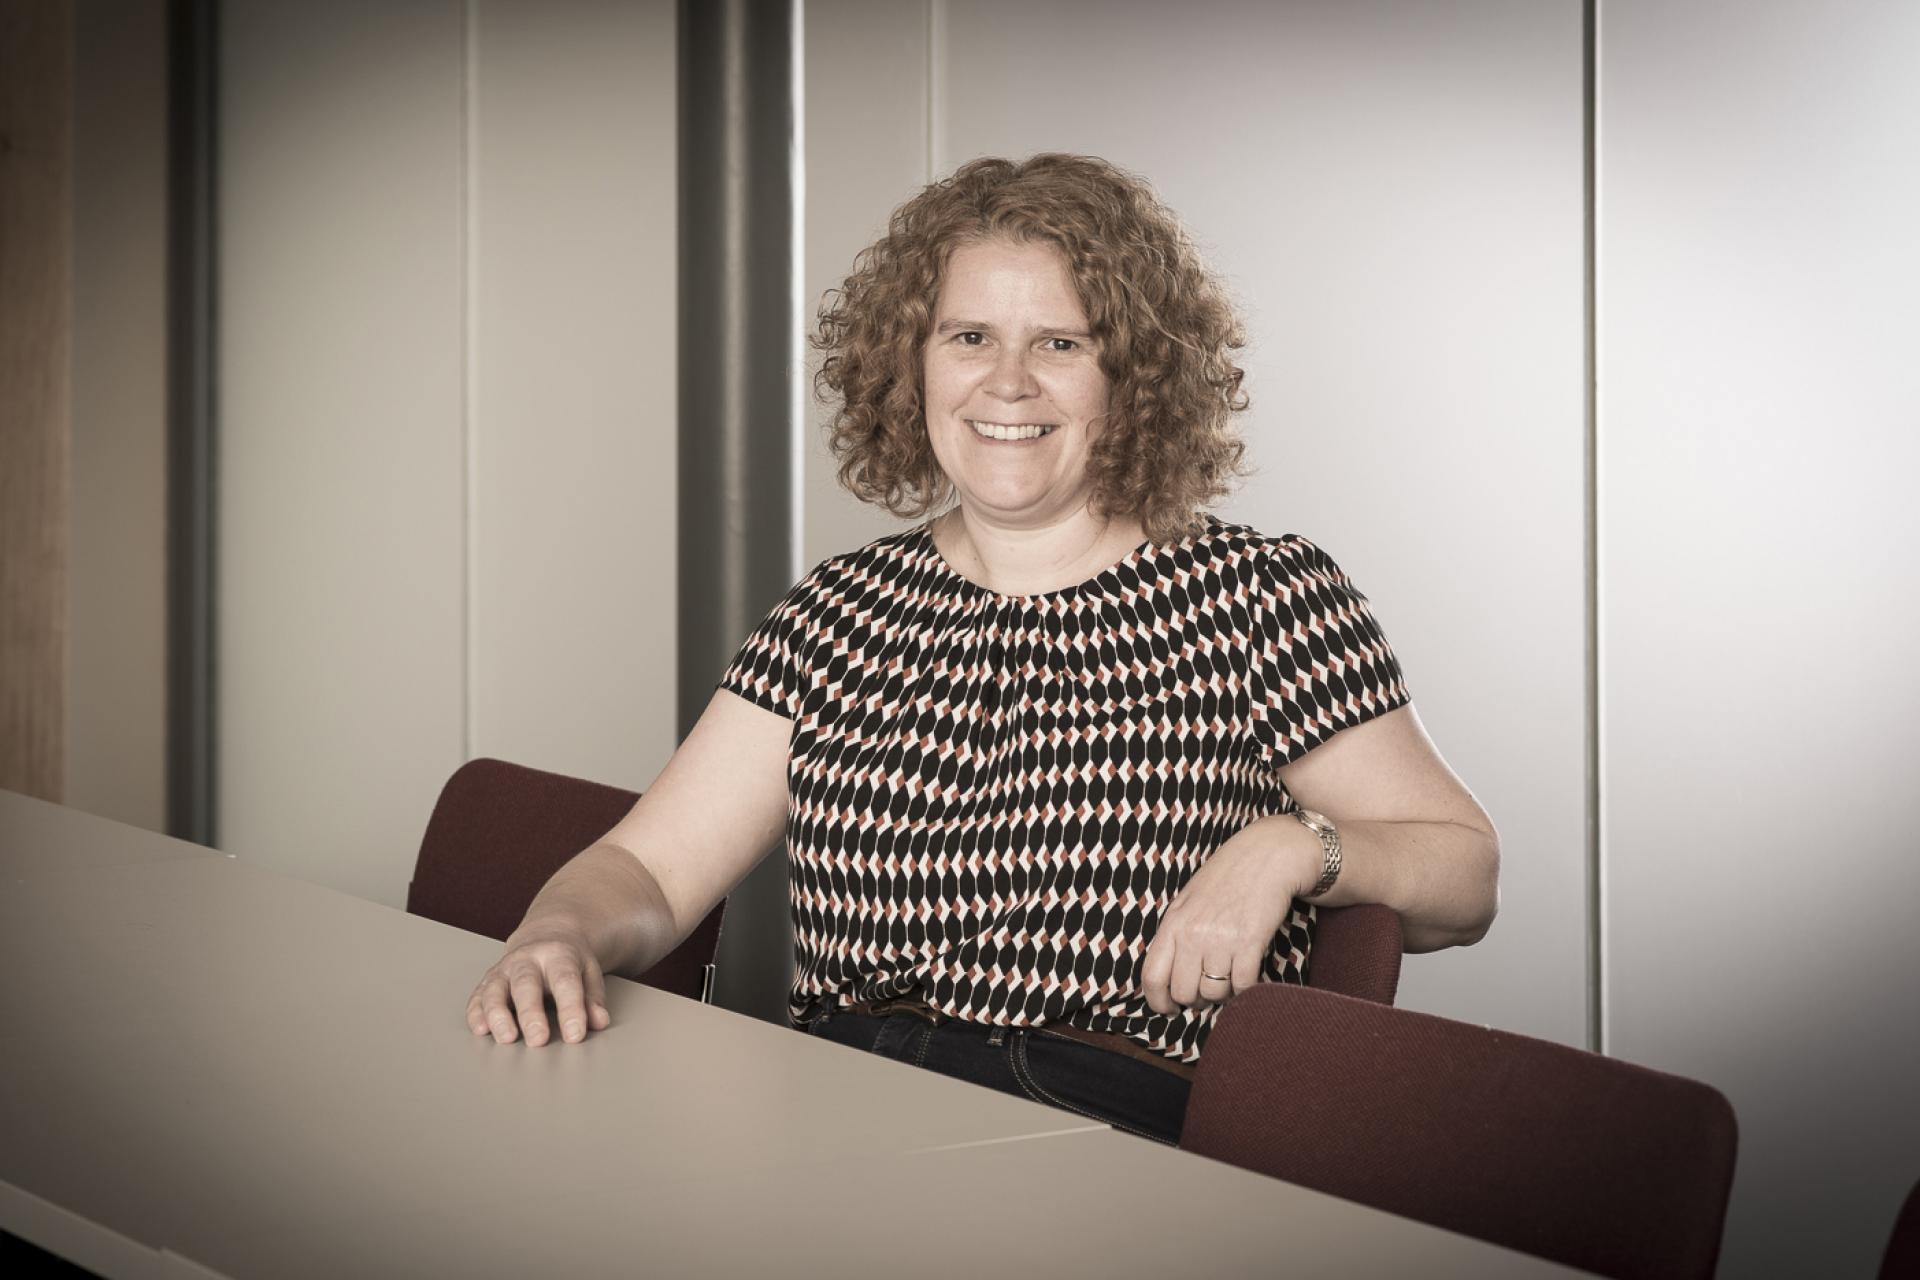 Inaugural lecture of Professor Laura Macgregor to focus on Bell and partnership law